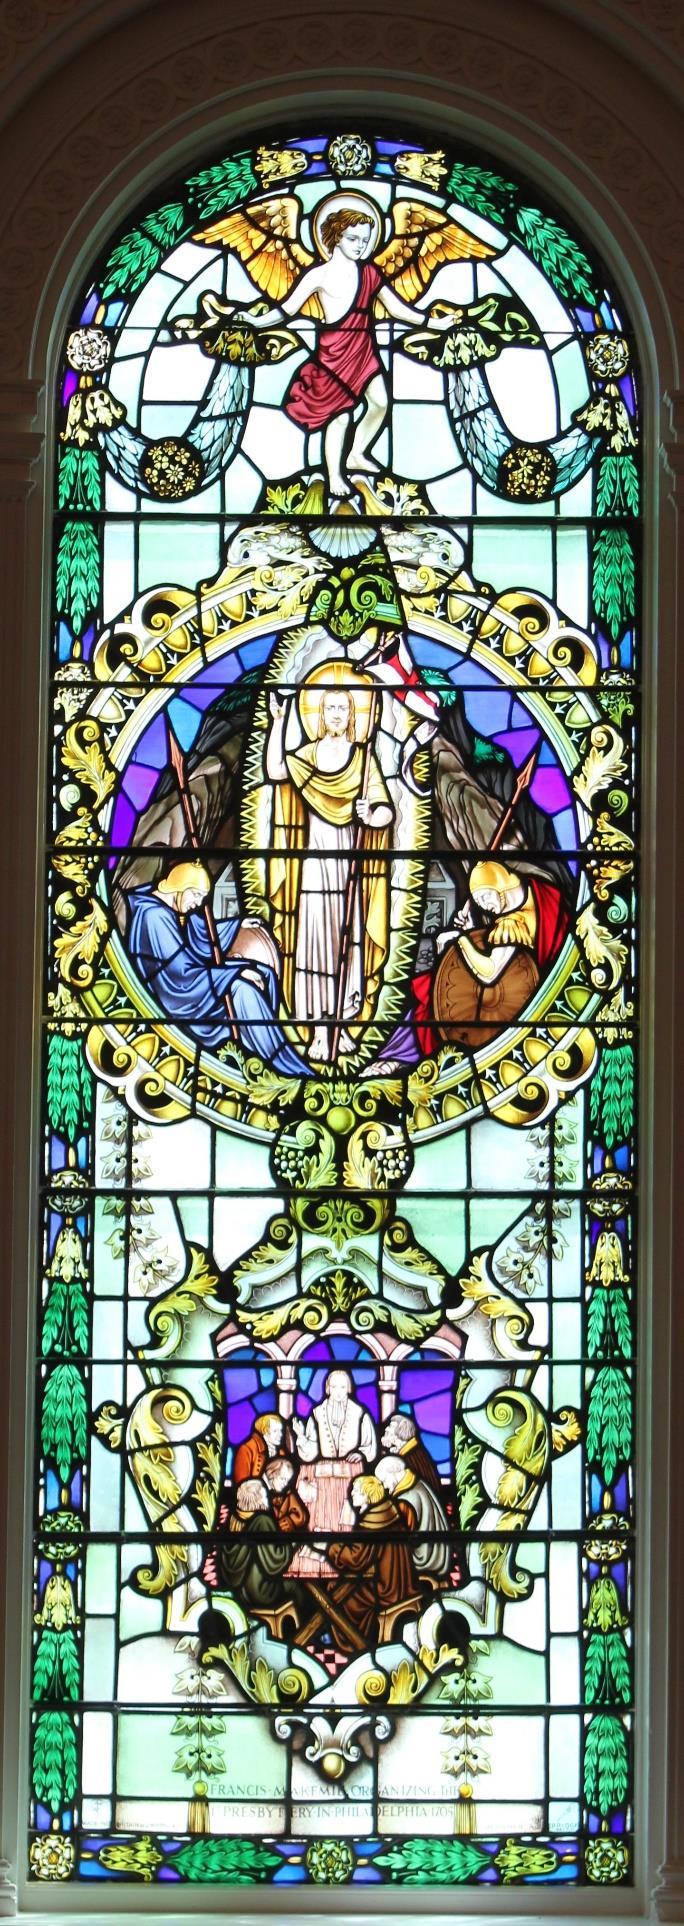 (Second Window on right side facing Chancel) Upper Medallion: The Resurrection of Jesus Christ 1 Corinthians 15:20 Lower Medallion: Francis Makemie The first Presbytery